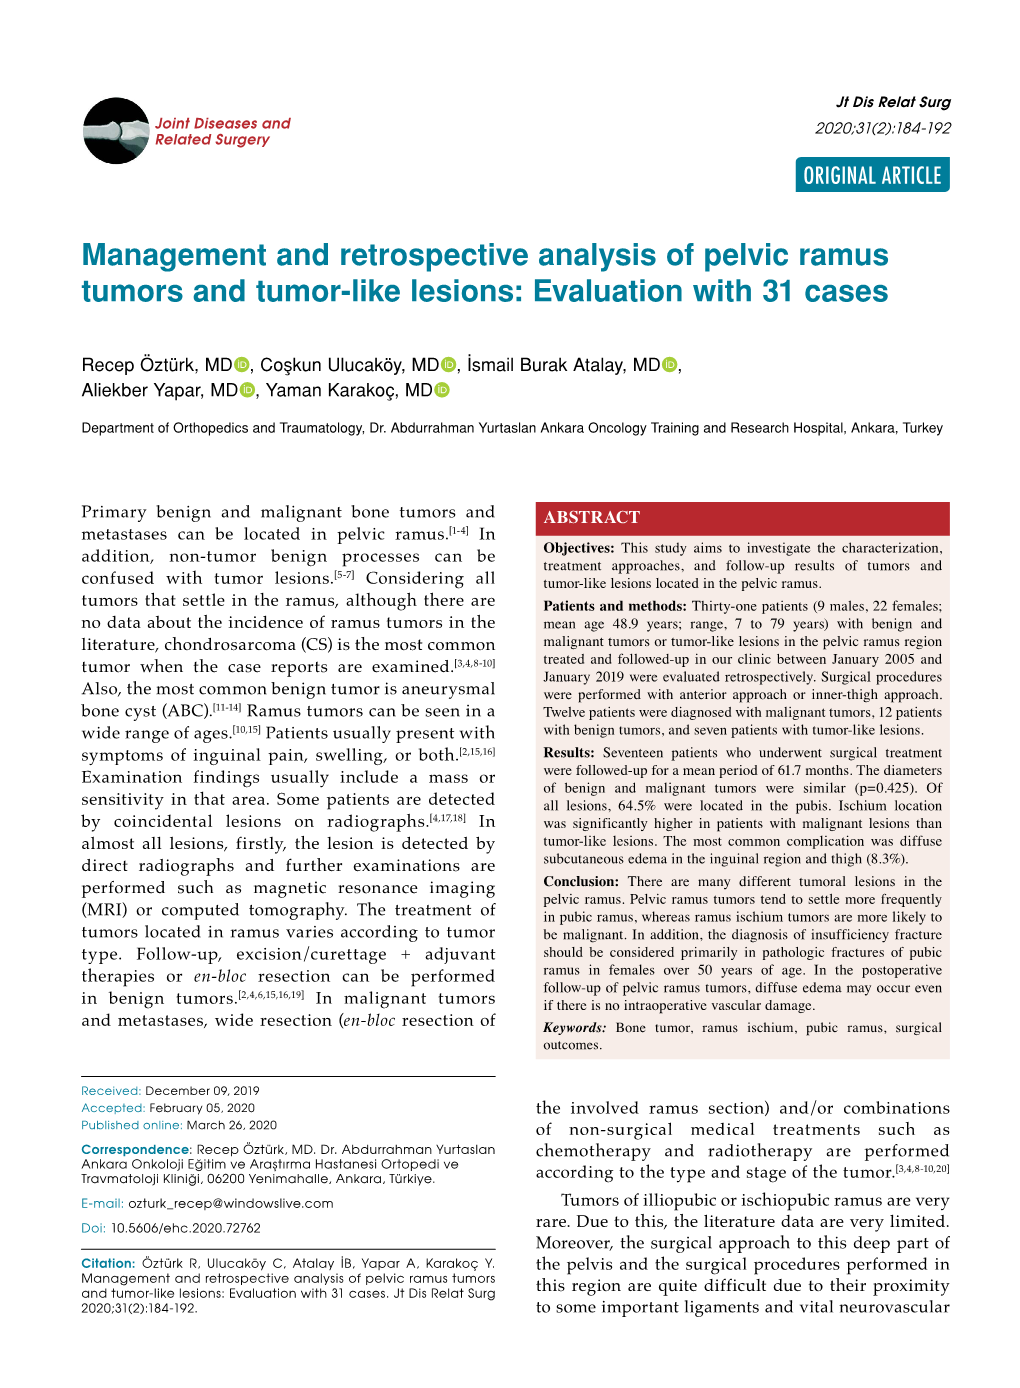 Management and Retrospective Analysis of Pelvic Ramus Tumors and Tumor-Like Lesions: Evaluation with 31 Cases